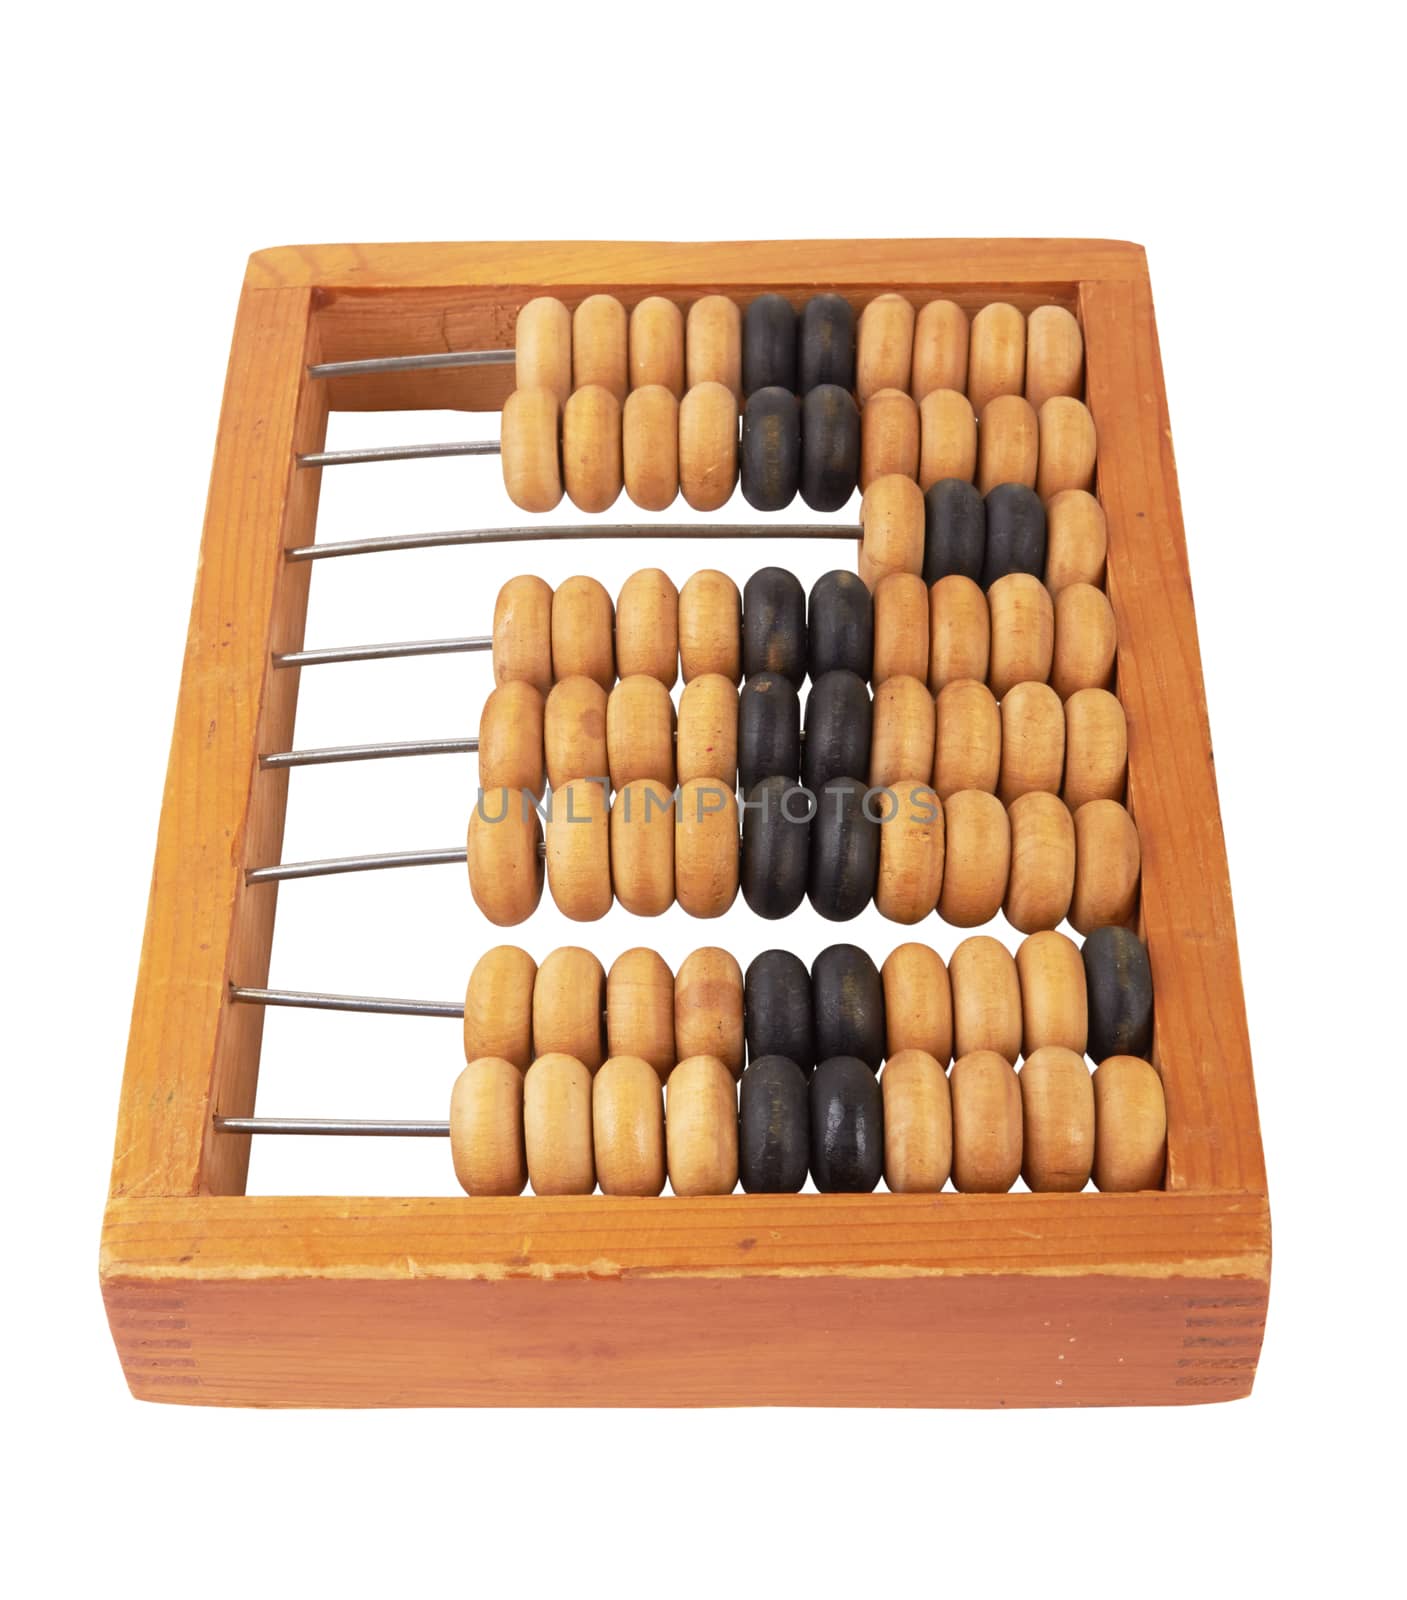 wooden abacus isolated on white by pioneer111